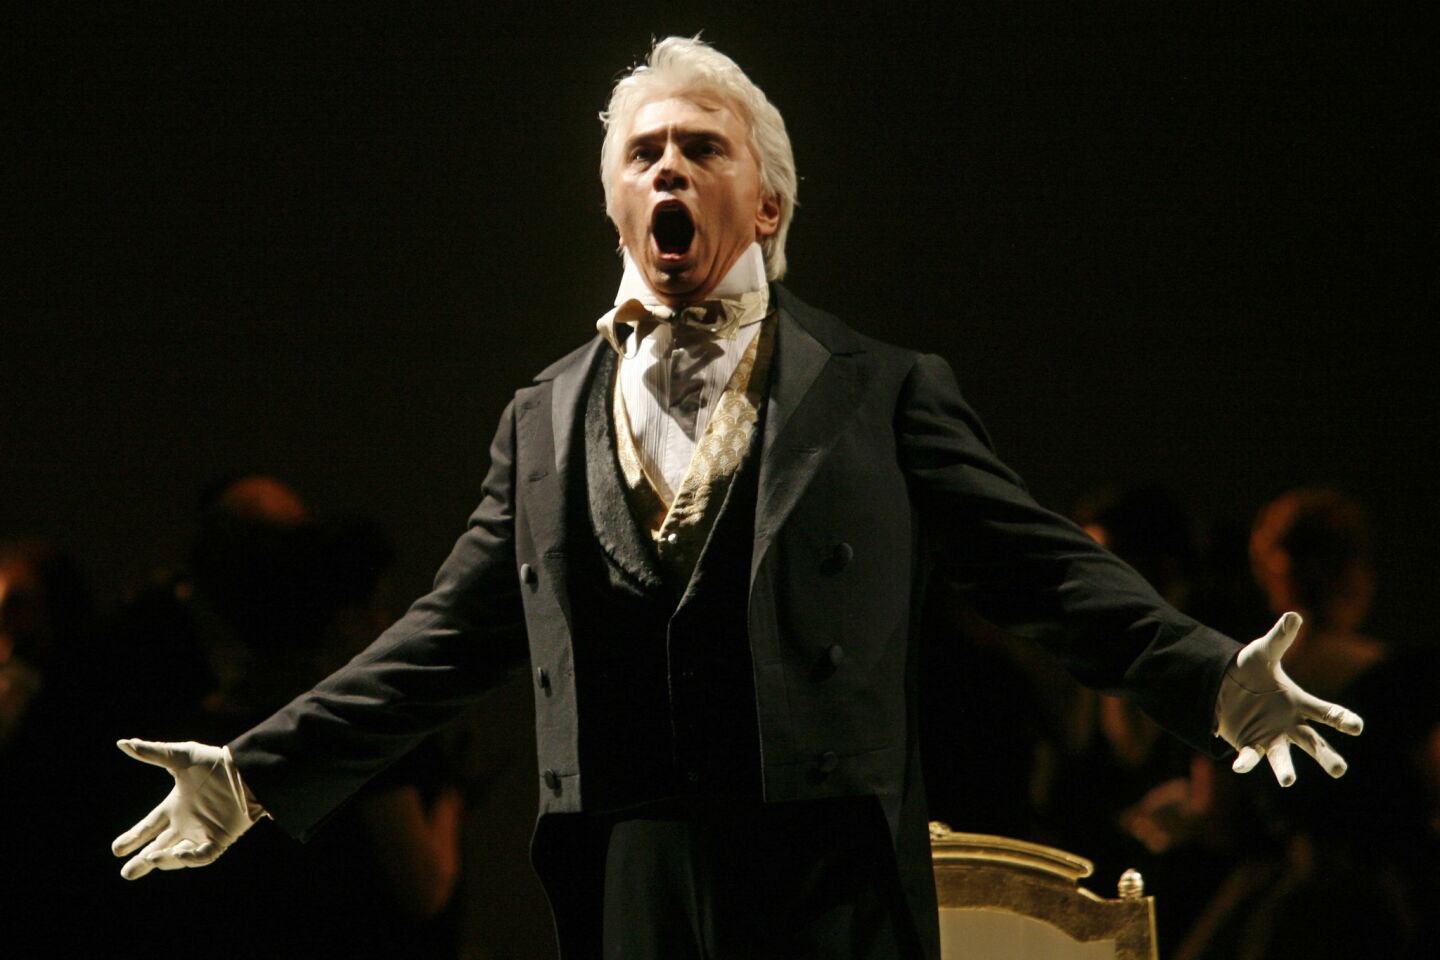 Called "the Elvis of Opera" and the "Siberian Express" by some, Hvorostovsky was known for his velvety baritone voice, dashing looks and shock of flowing white hair. He was 55. Full obituary